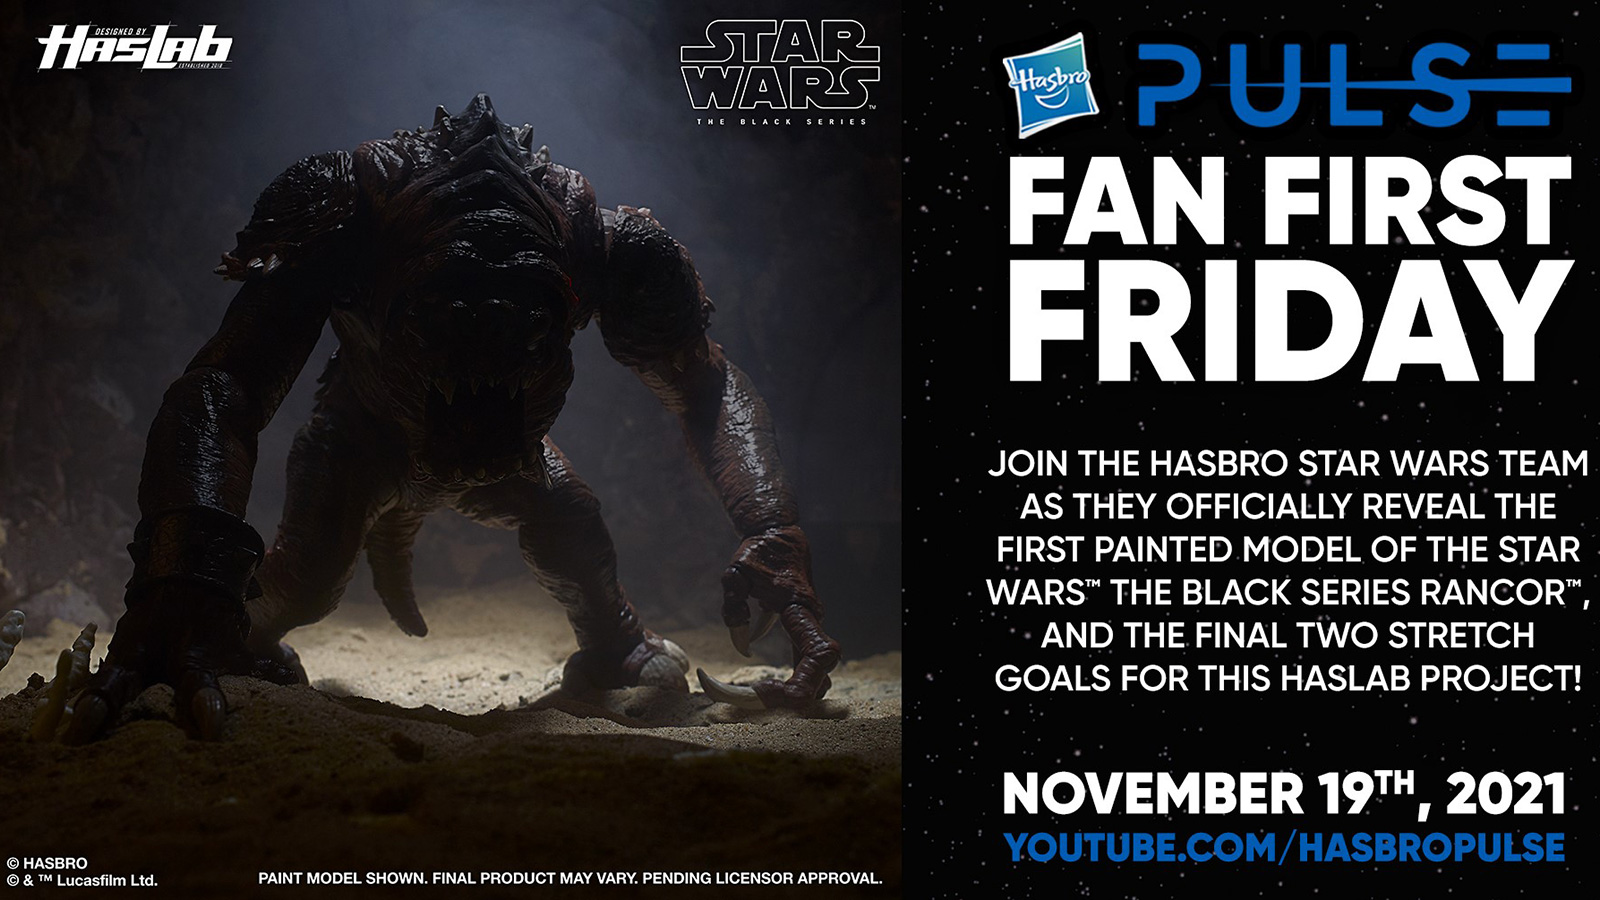 Hasbro Pulse Star Wars Fan First Friday Livestream 11/19 - Painted Rancor And Final Two Stretch Goals